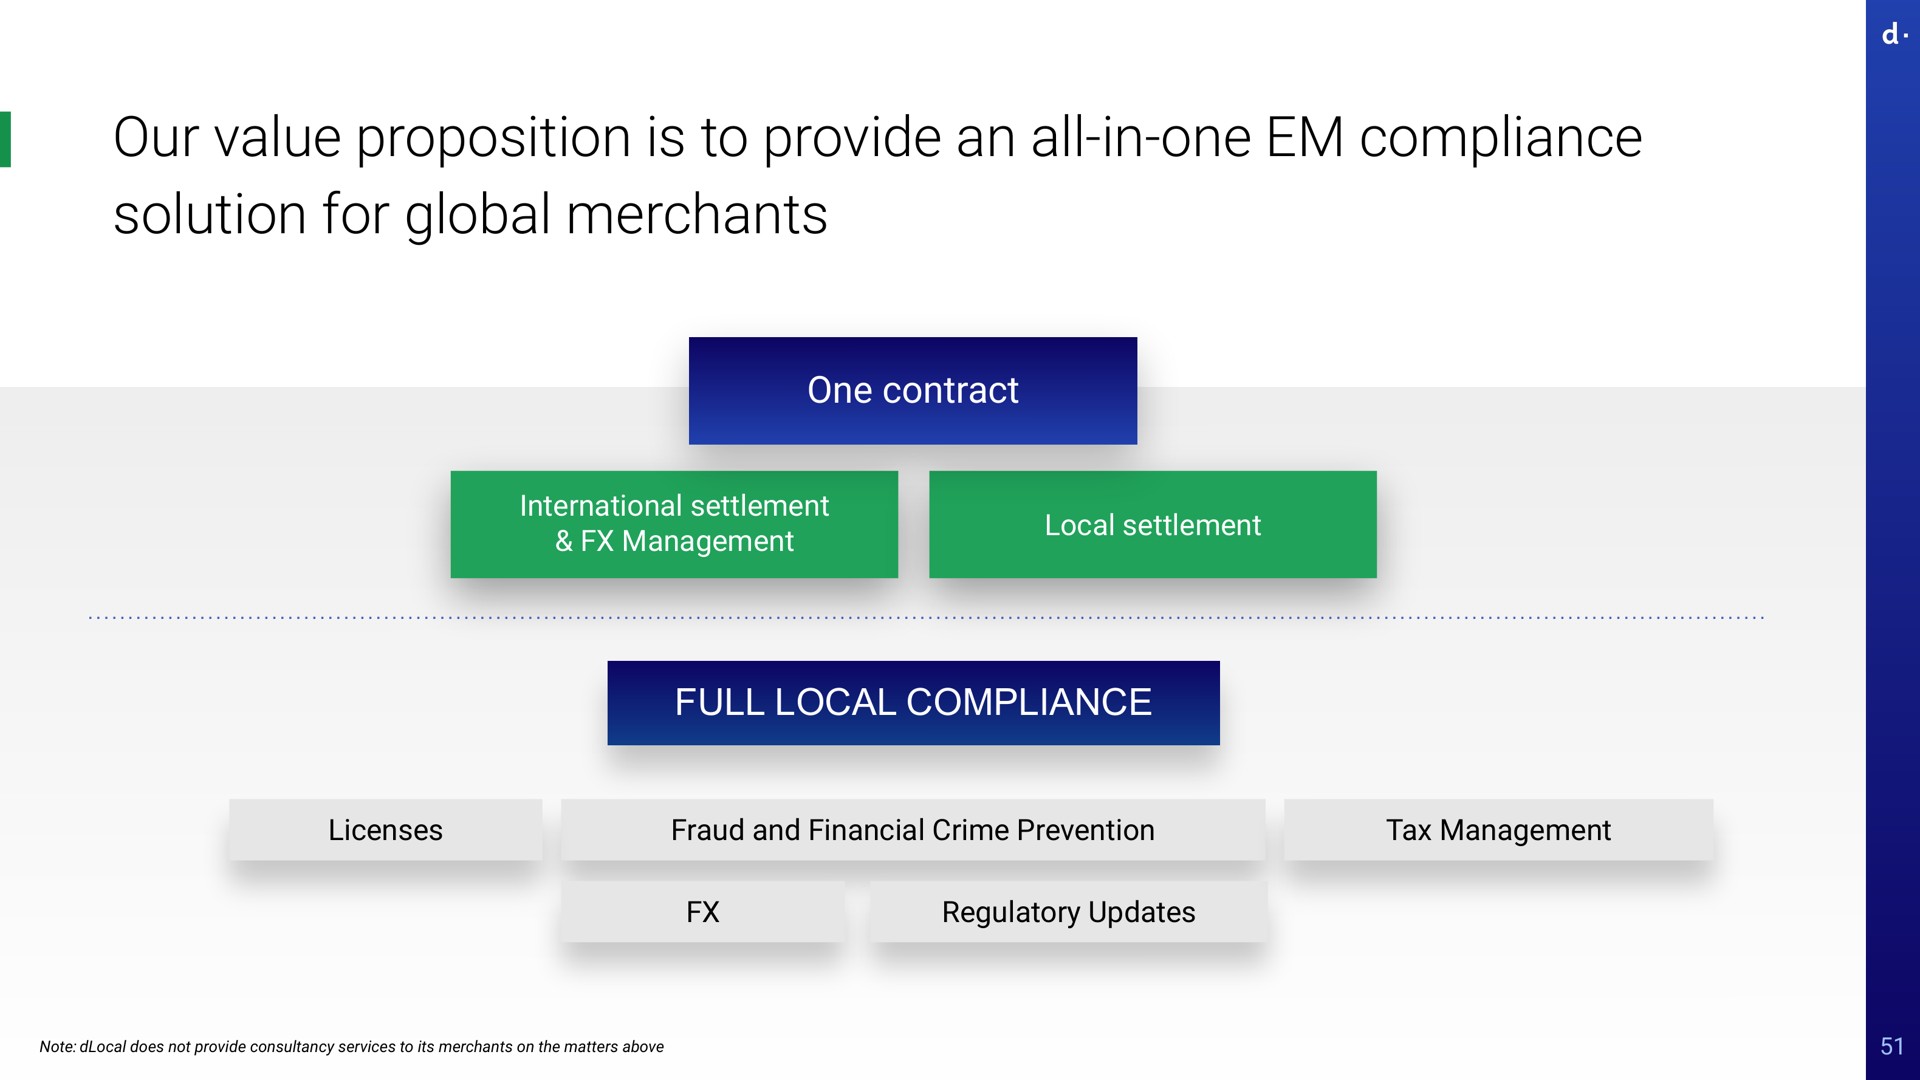 our value proposition is to provide an all in one compliance solution for global merchants one contract international settlement management local settlement full local compliance licenses fraud and financial crime prevention tax management regulatory updates note does not services its on the matters above | dLocal